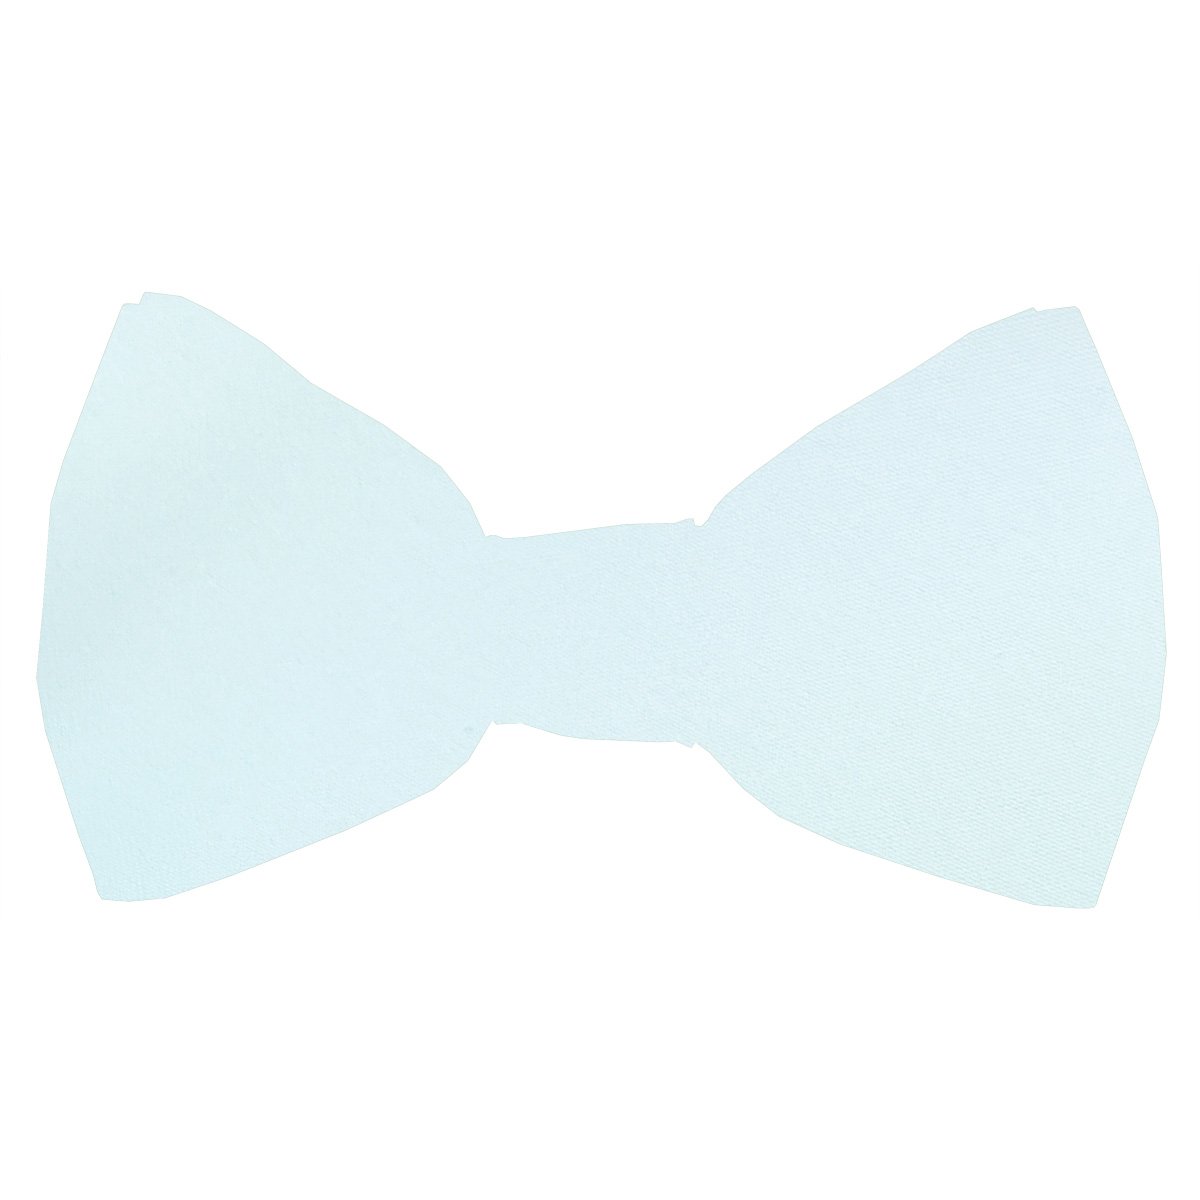 Forget Me Not Boys Bow Tie - Childrenswear